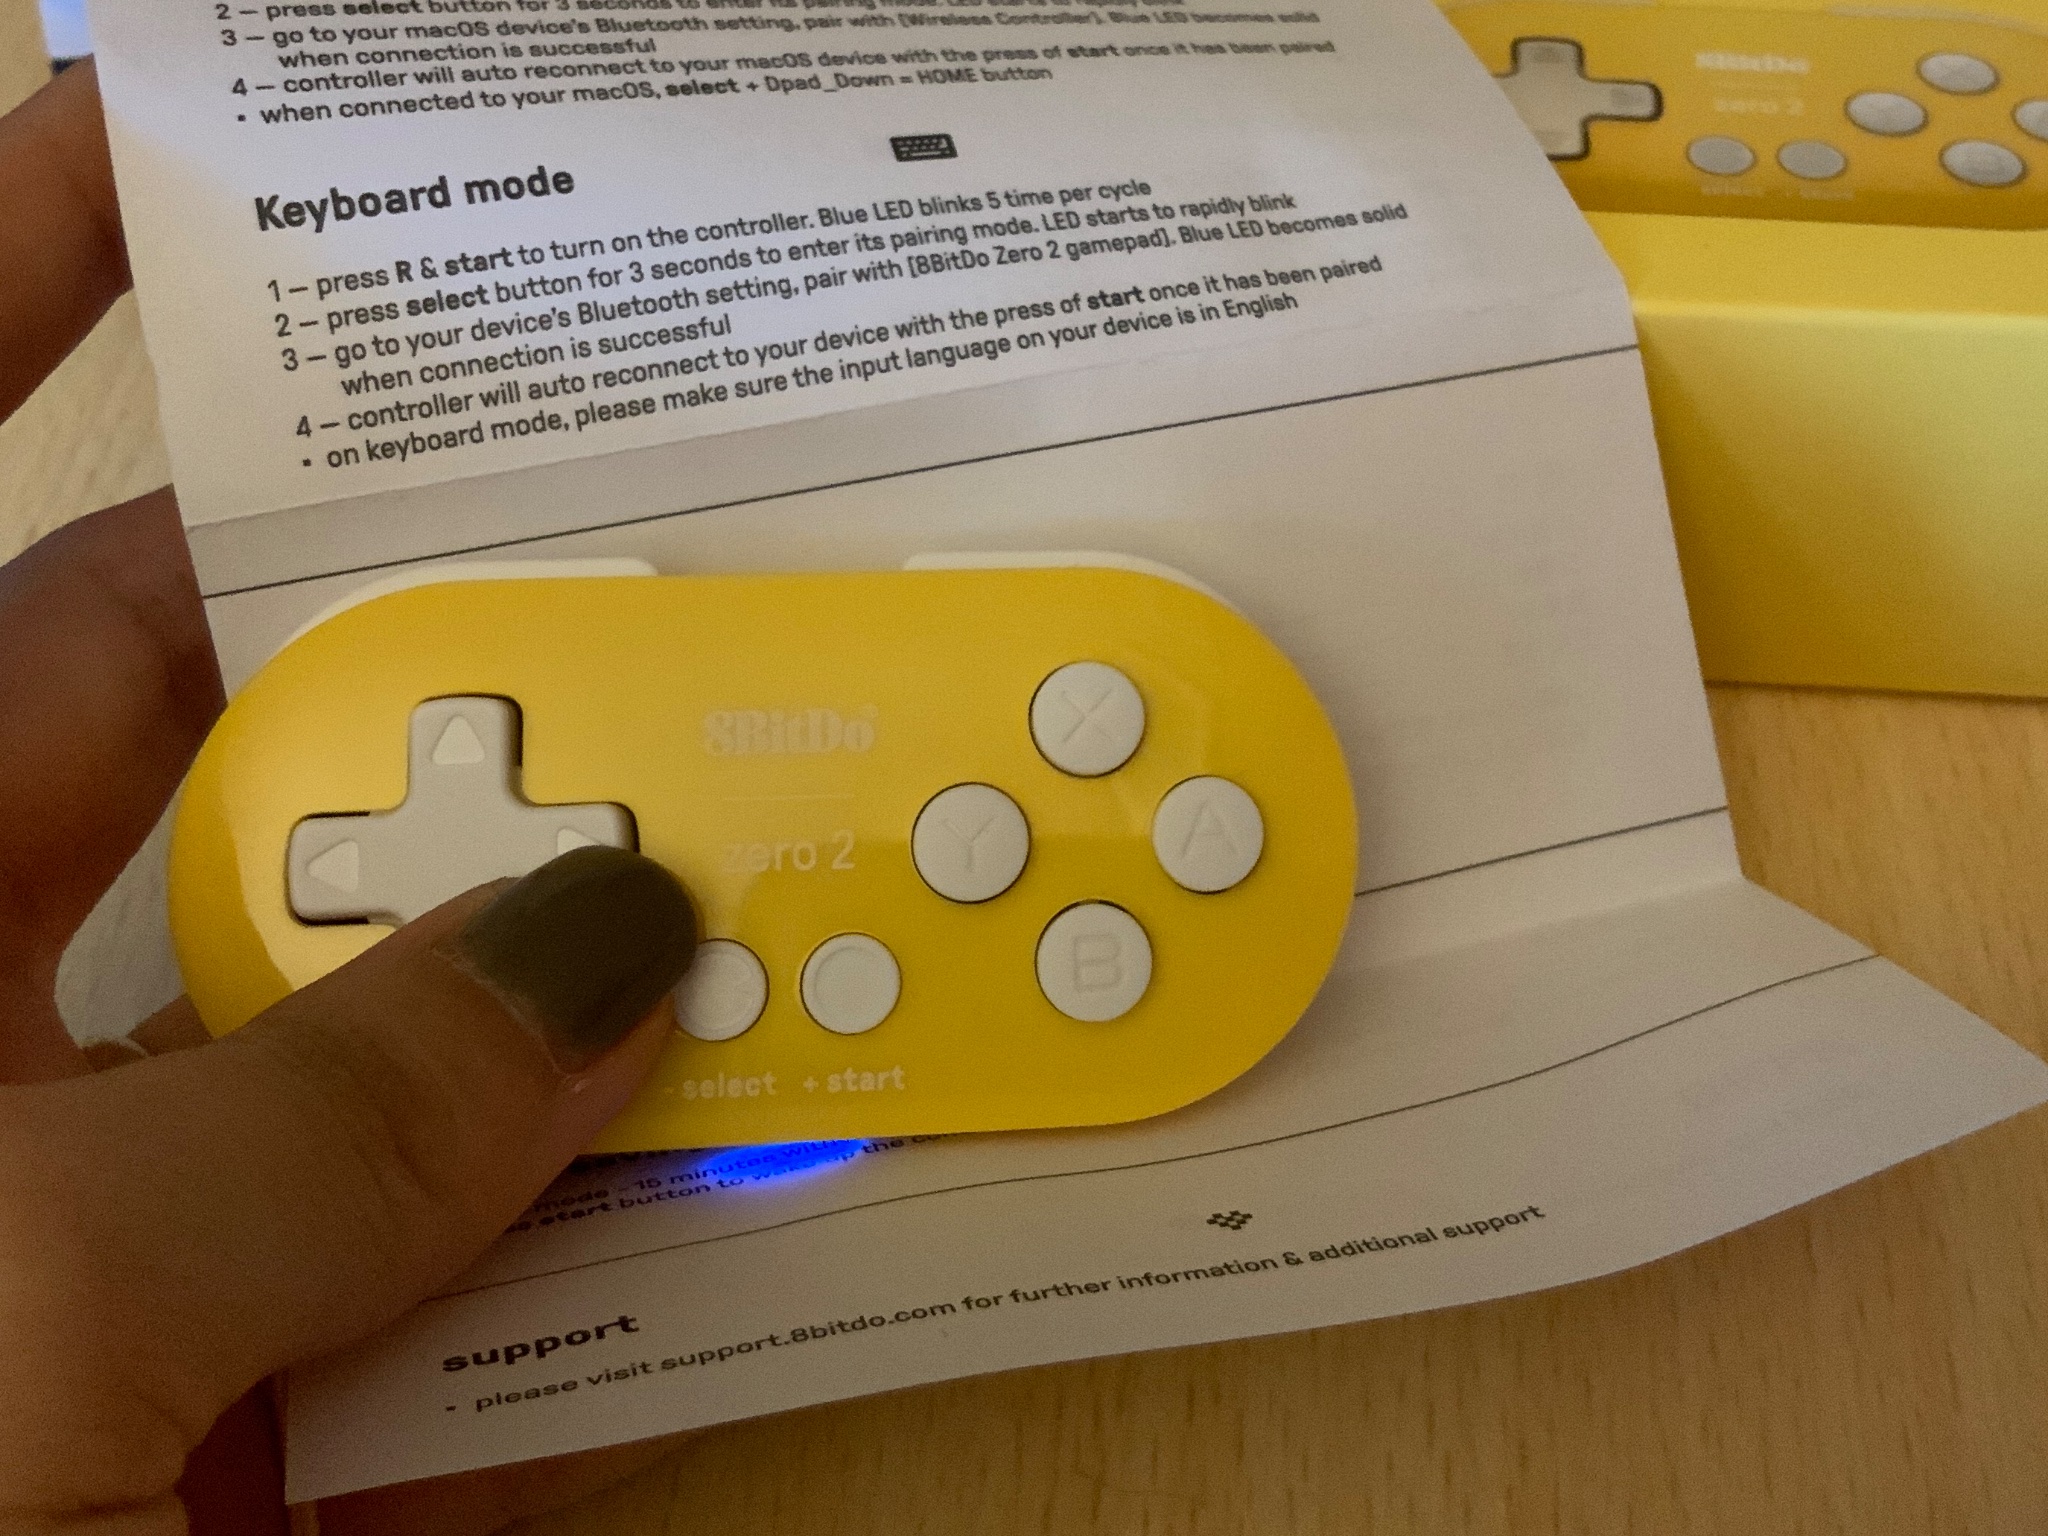 Irene Koh Update Got The 8bitdo Zero2 To See If It Works The Same It S Follow The Instructions For Keyboard Mode Pairing Start R Then Hold Select Until